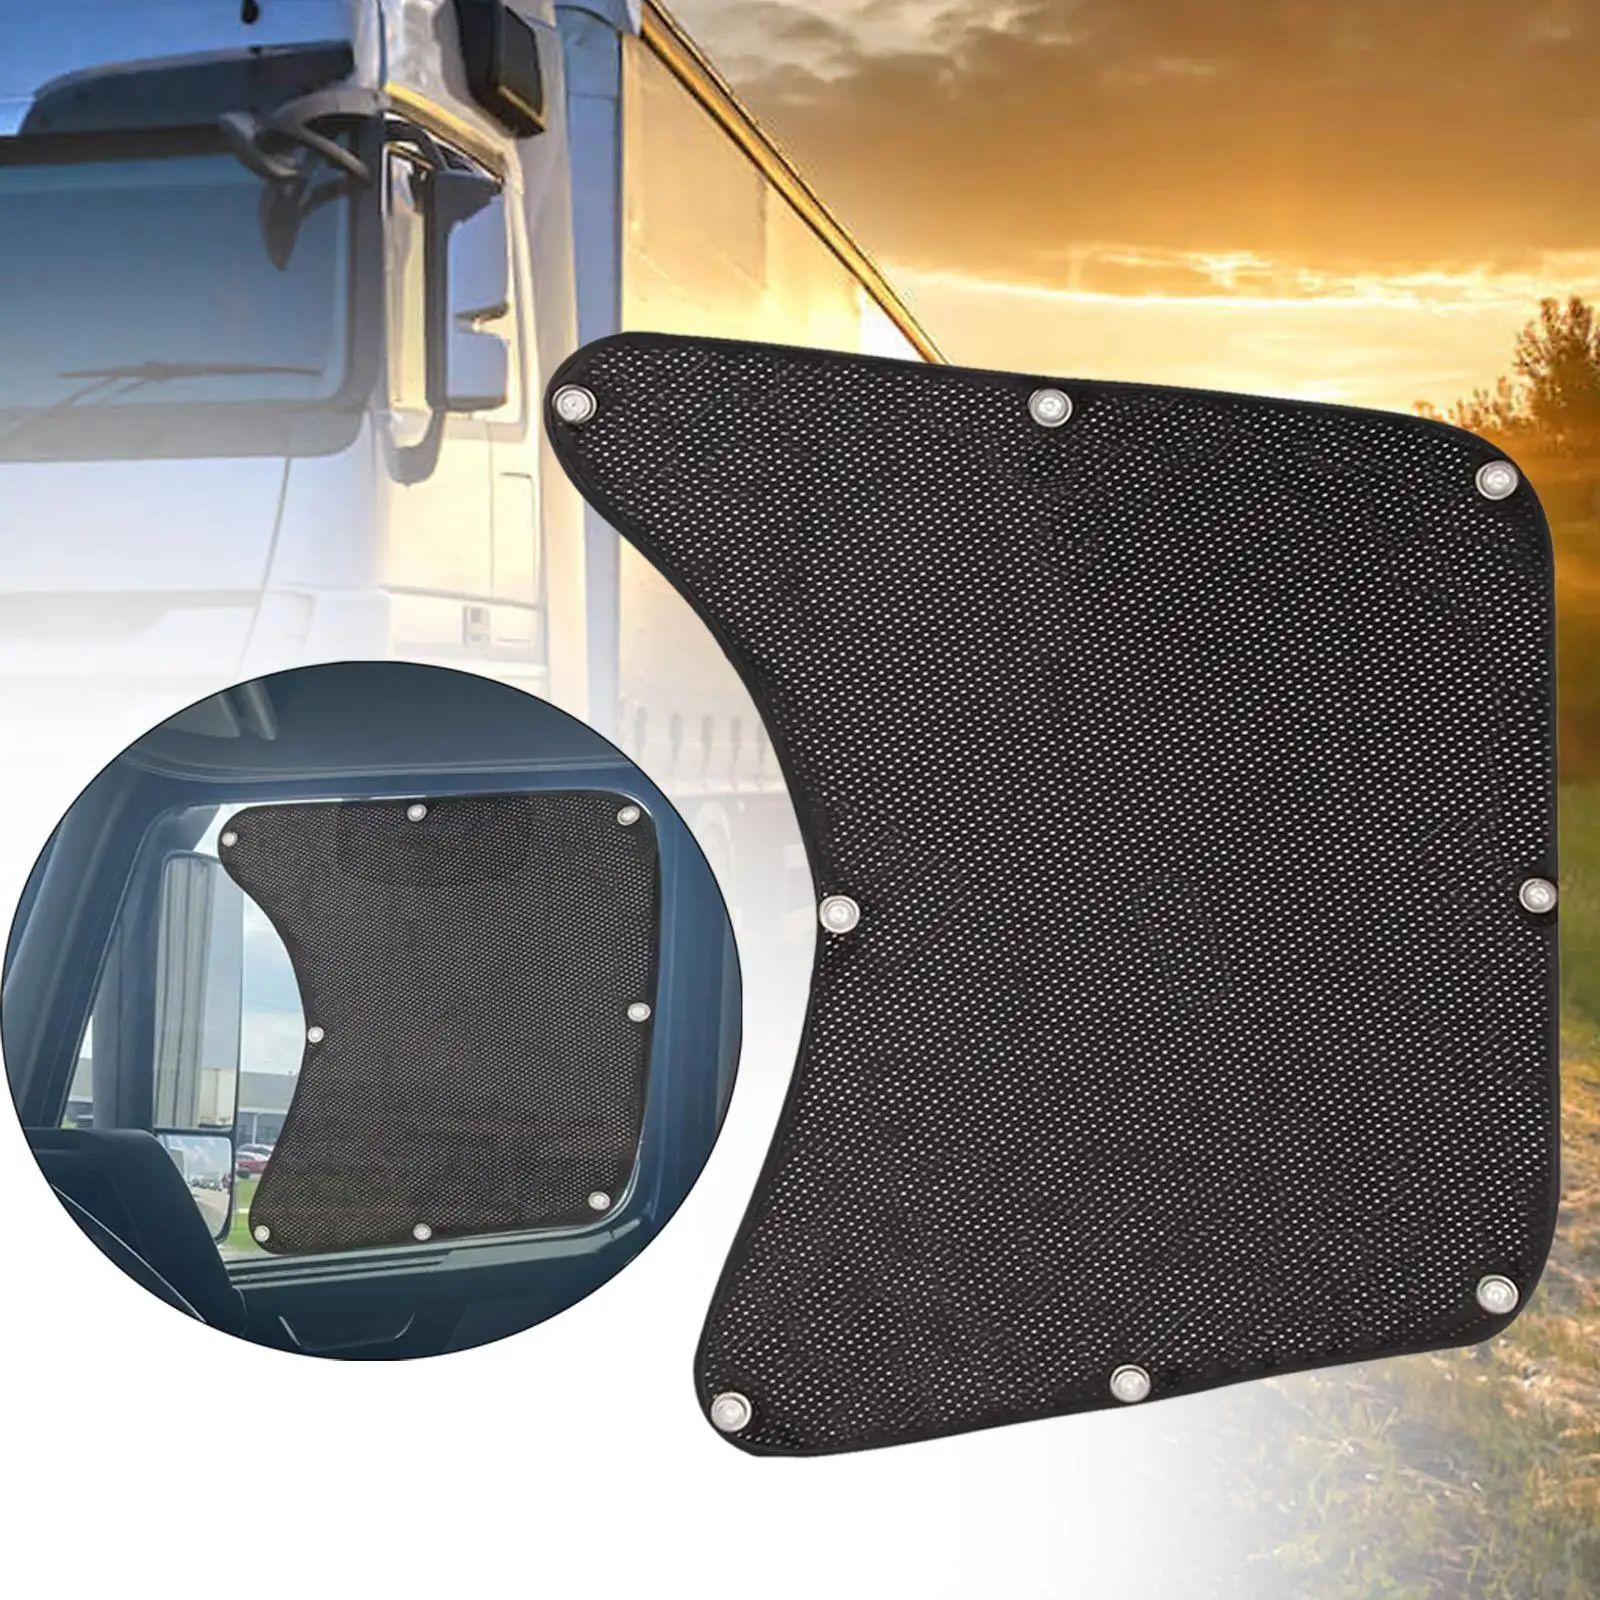 Truck Window Shade Side Window Shade Interior Protection Glare Cover Easy Install